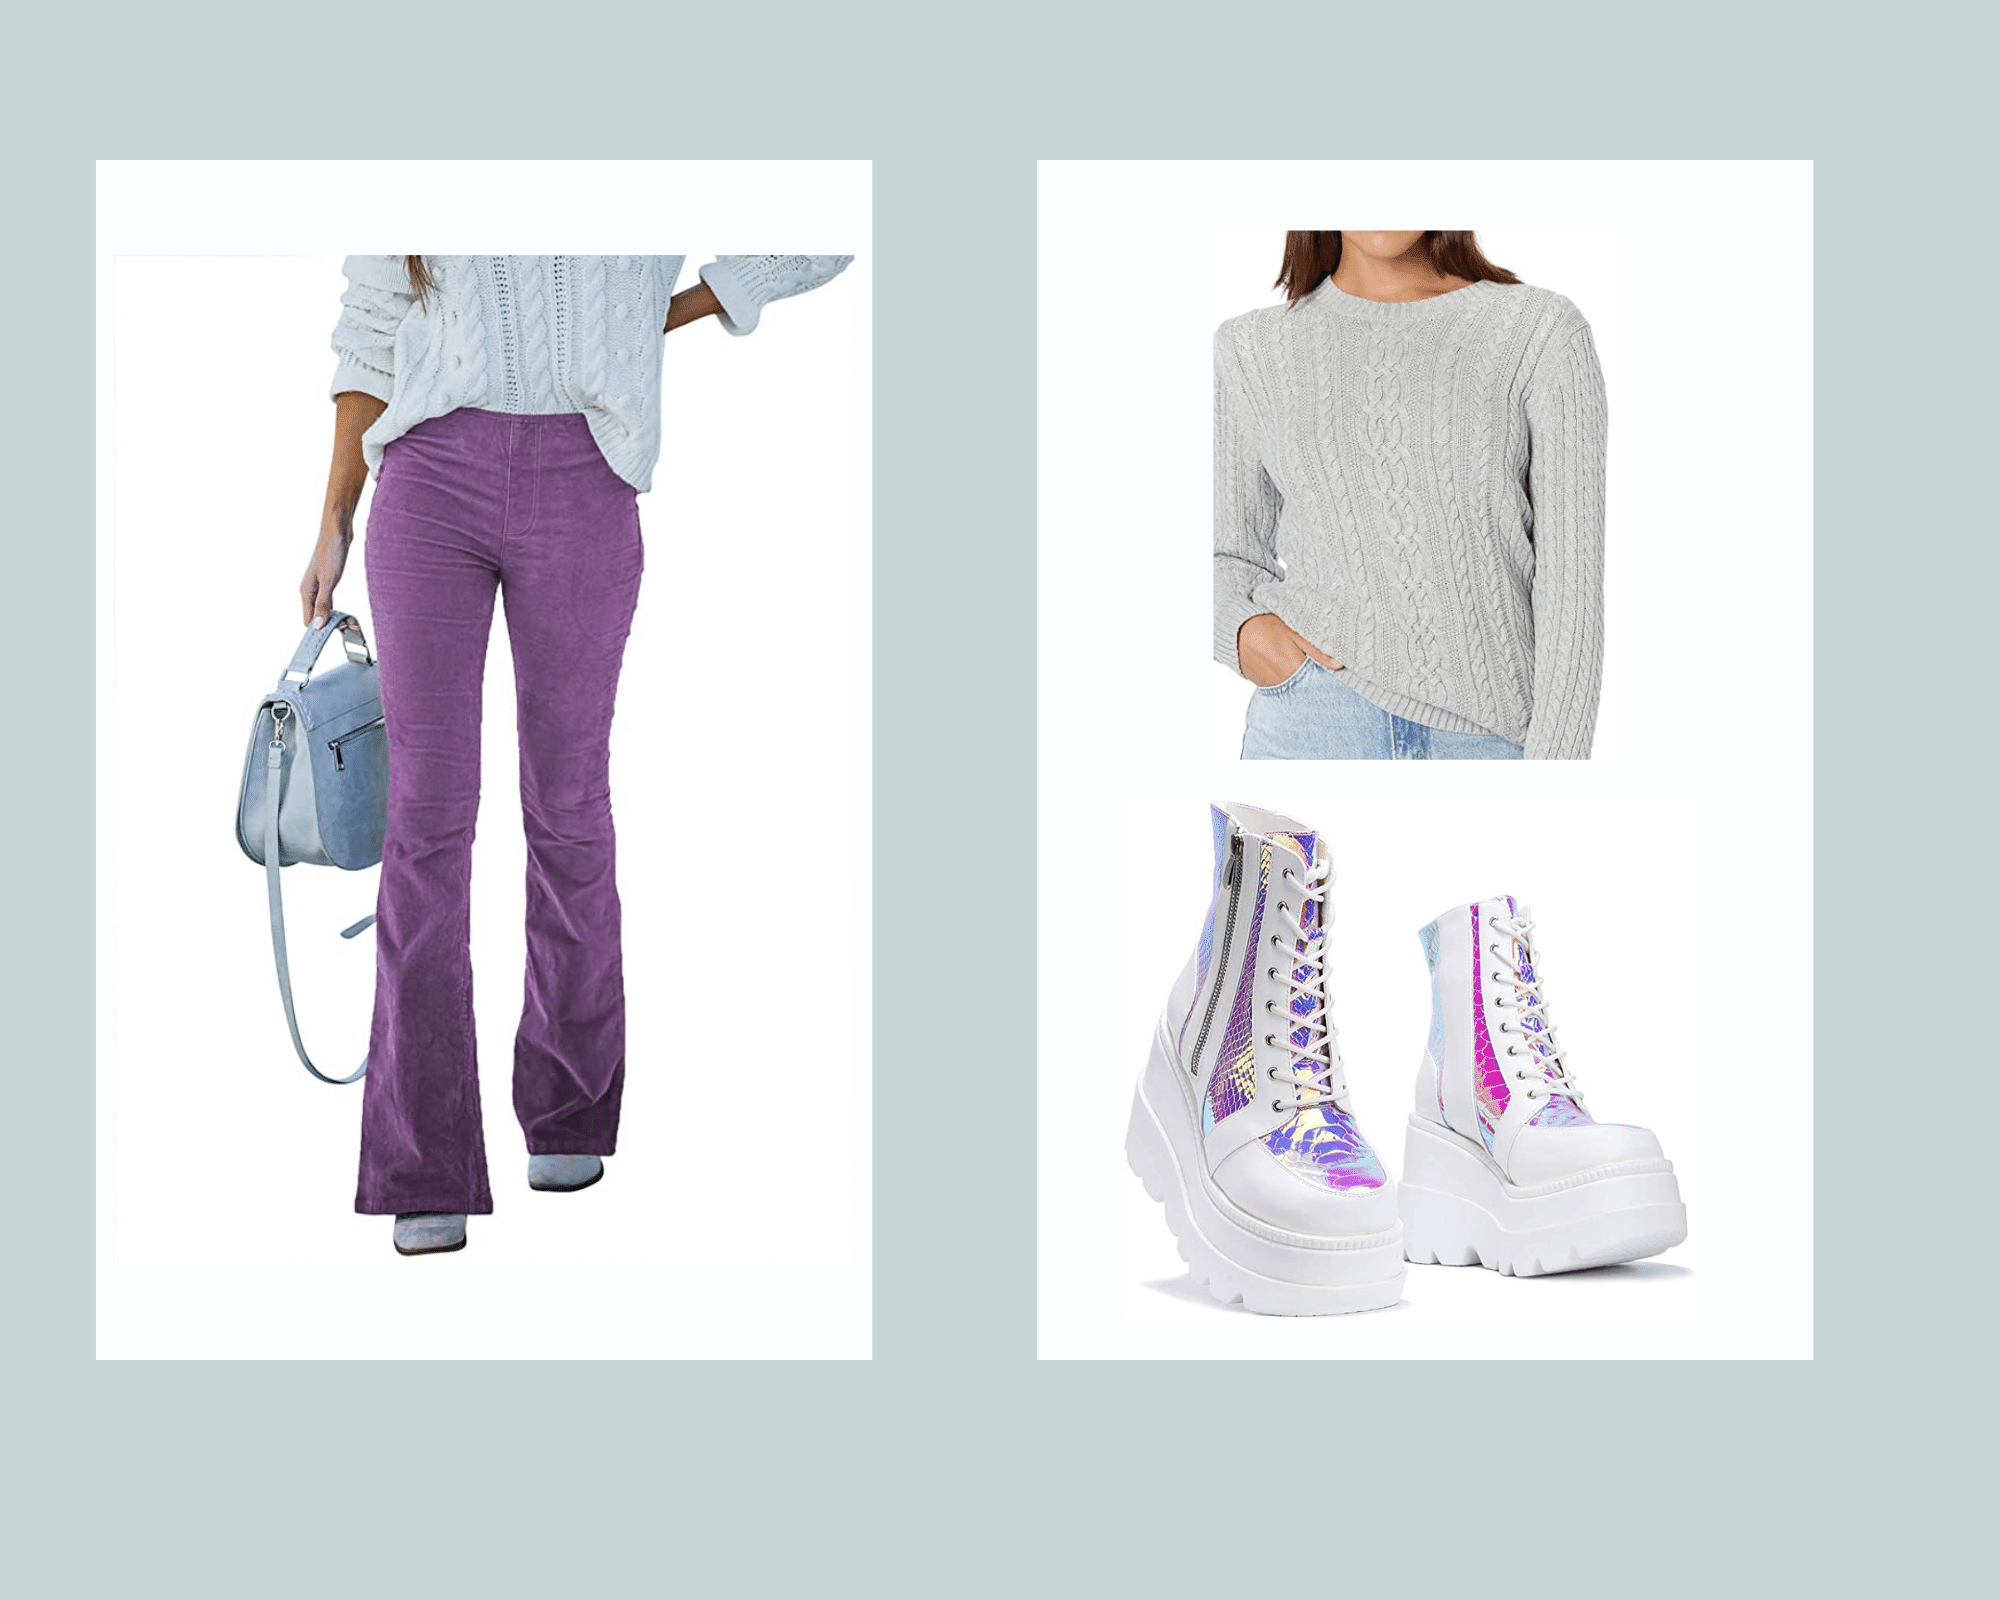 Purple Cords, Cable Knit Sweater and Platform Sneaker